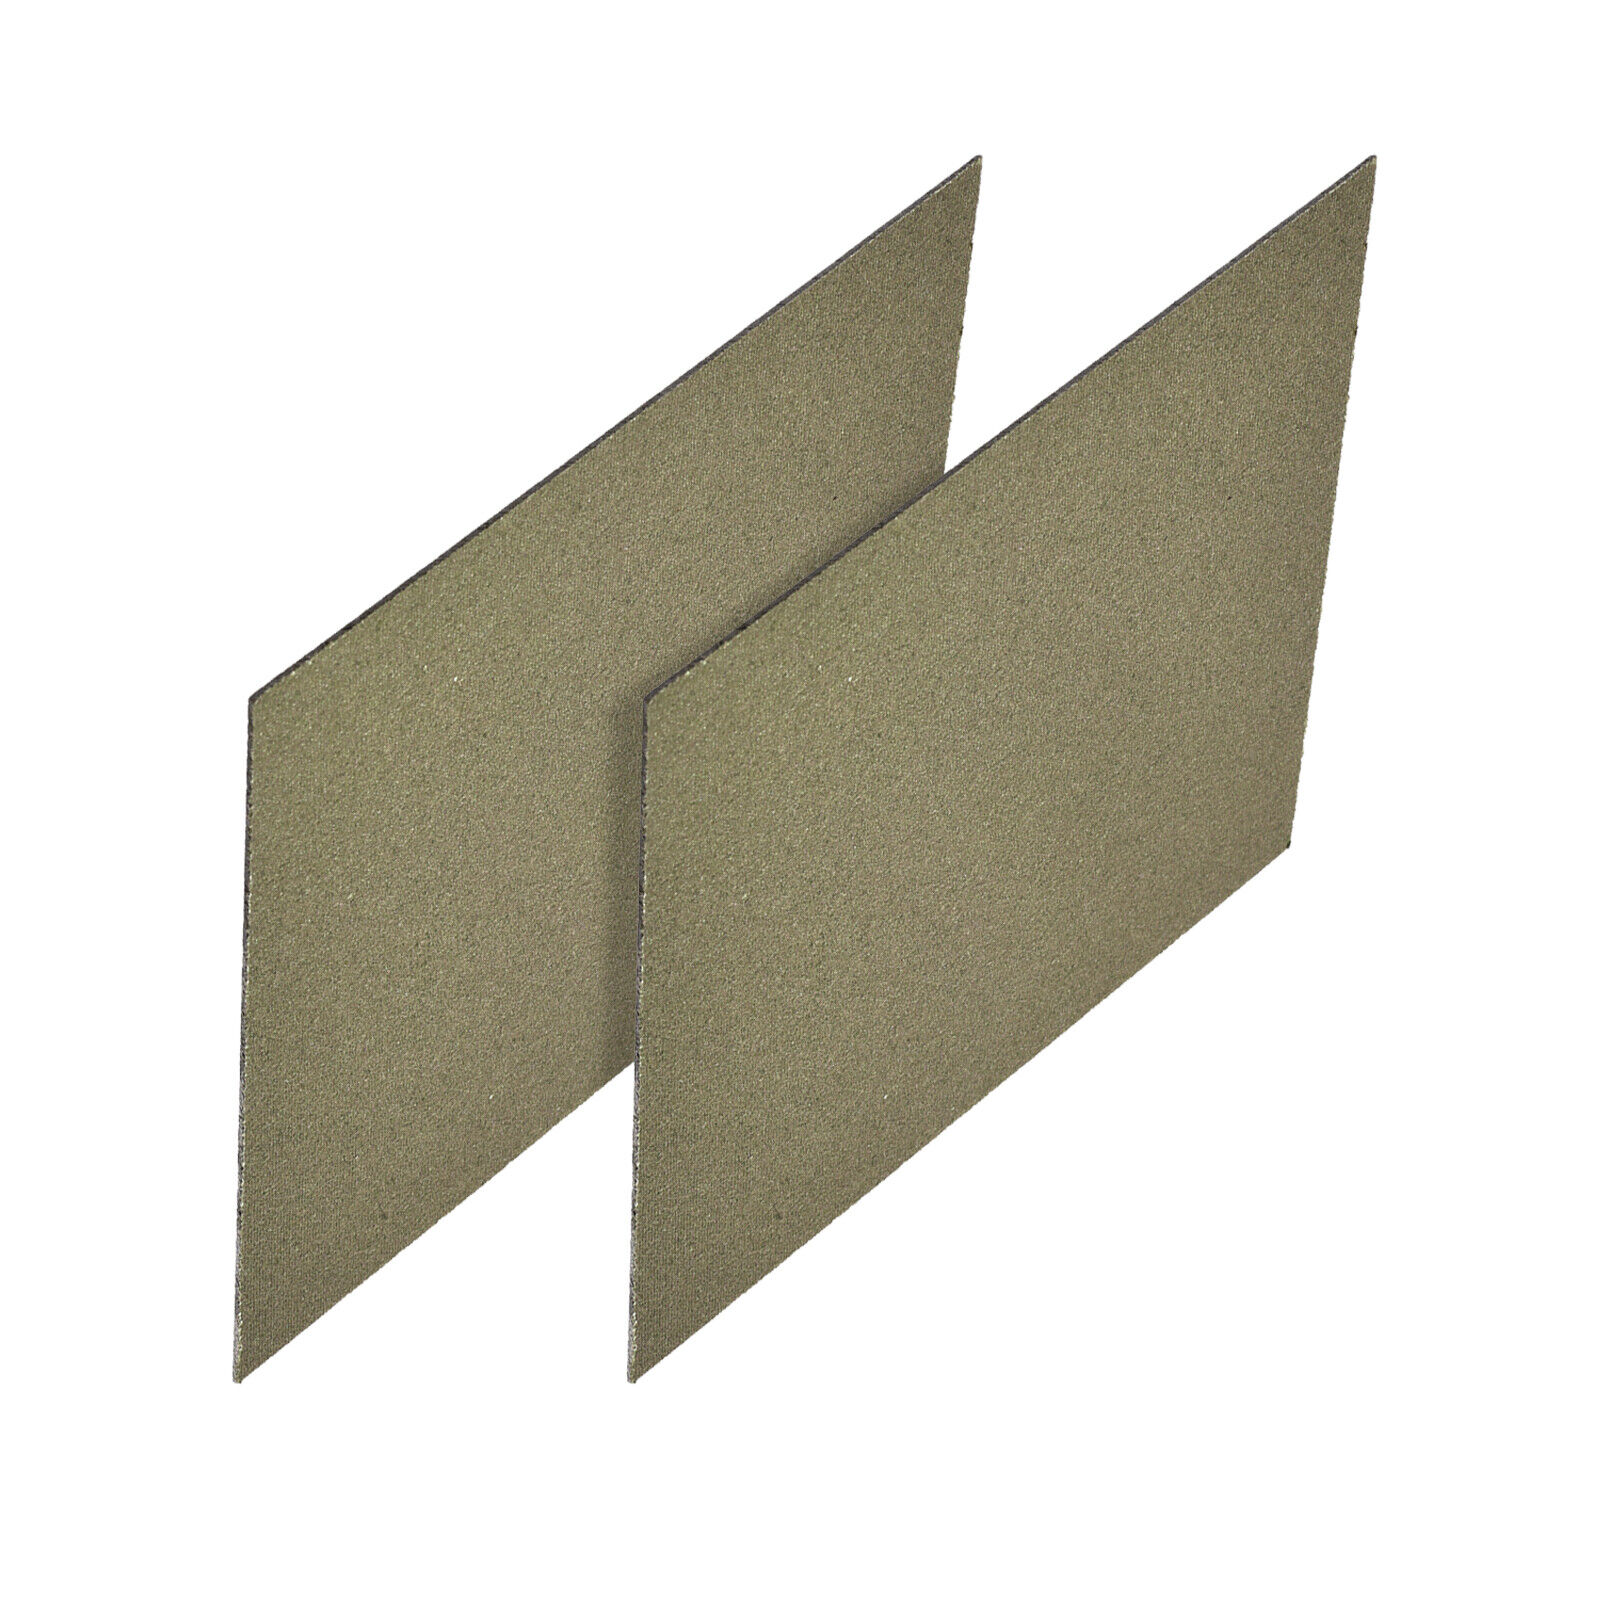 Microwave Oven Waveguide Cover Mica Repairing Plate 150x150x0.8mm, Pack Of 2